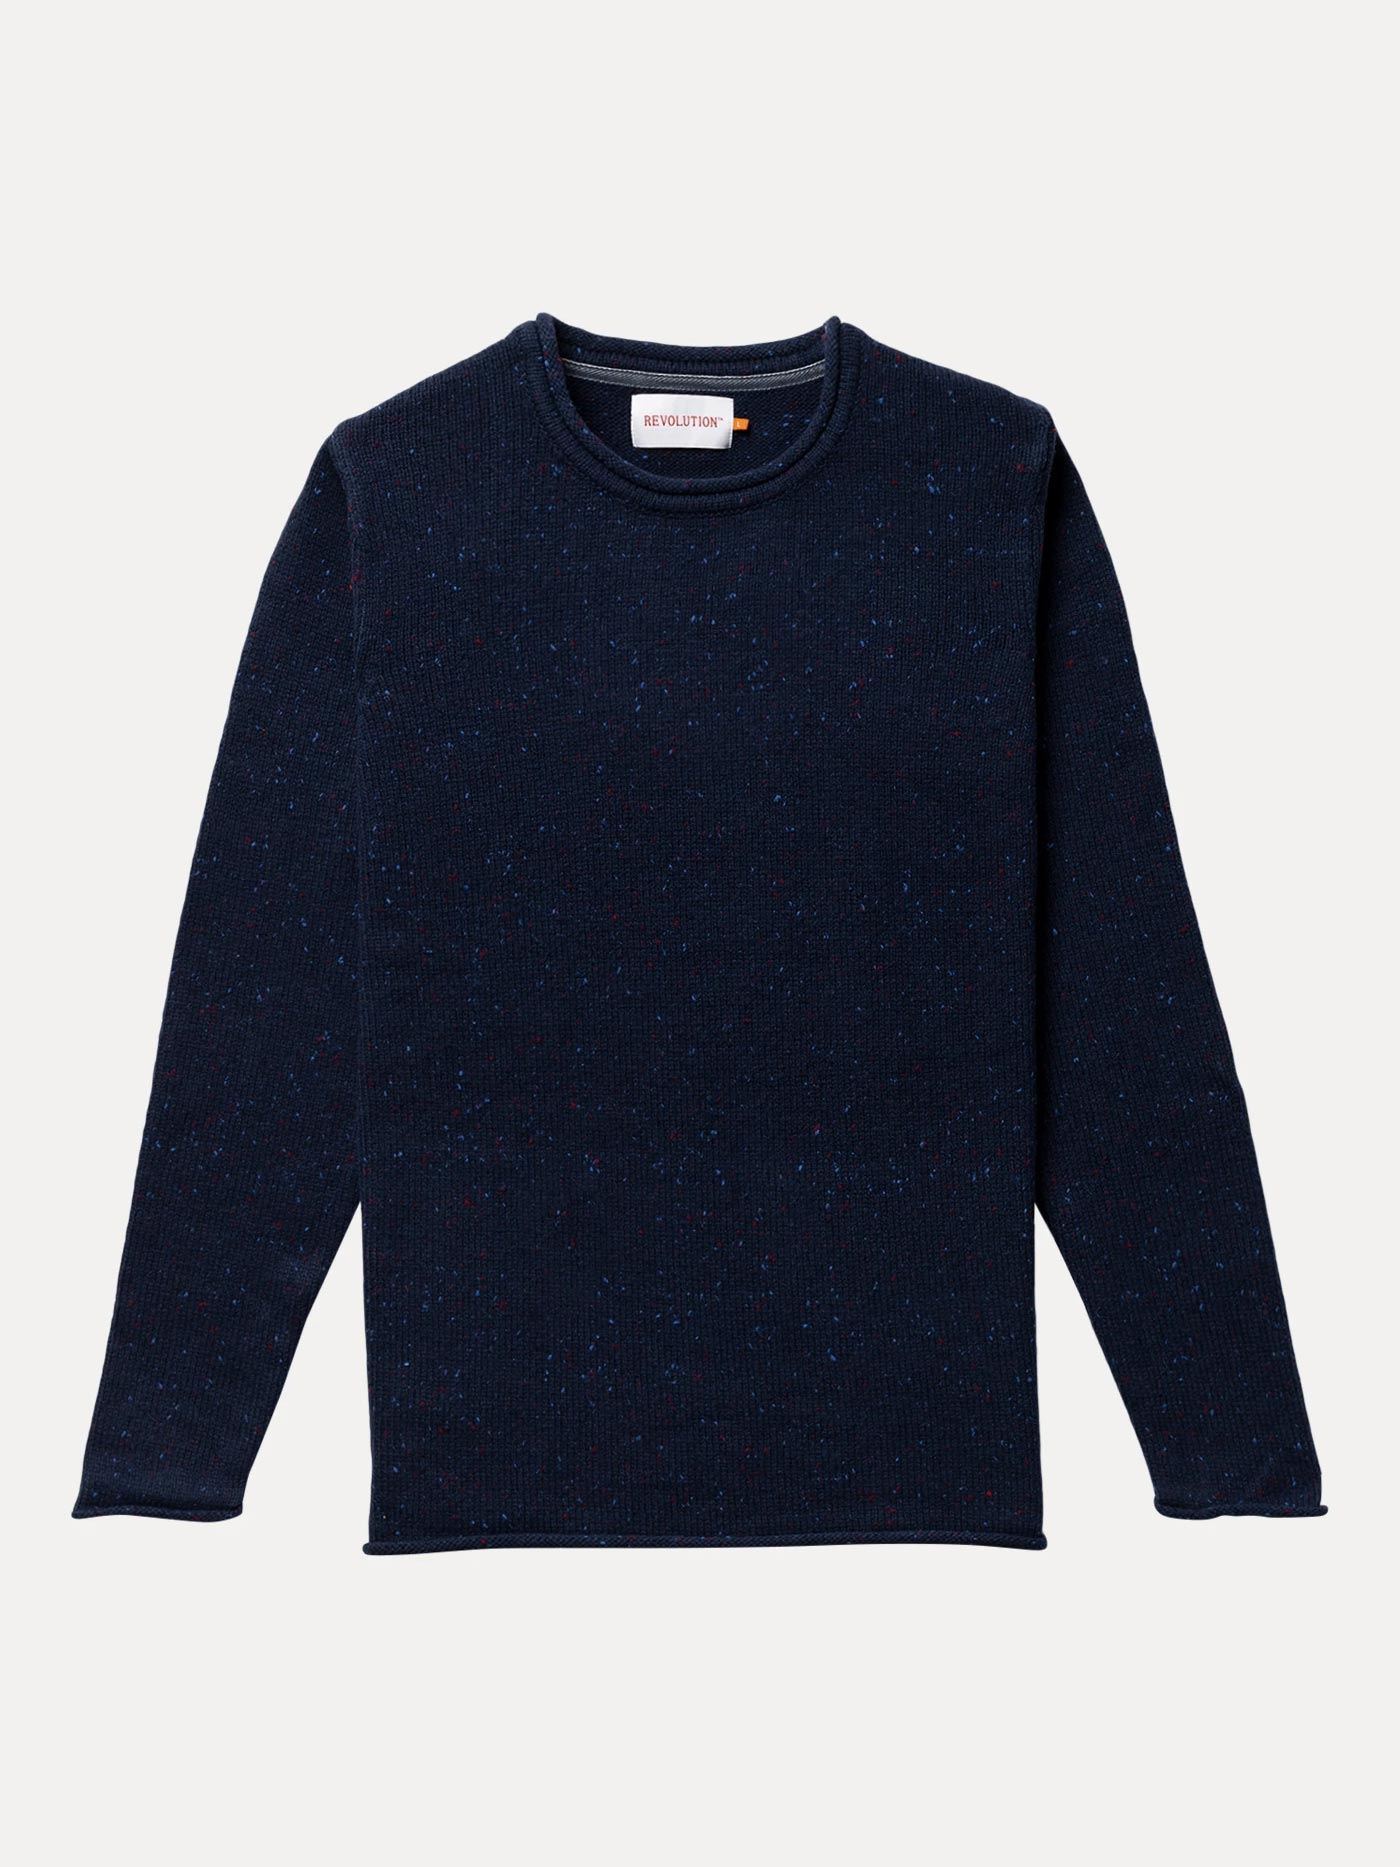 STRUCTURED NEP SWEATER NAVY